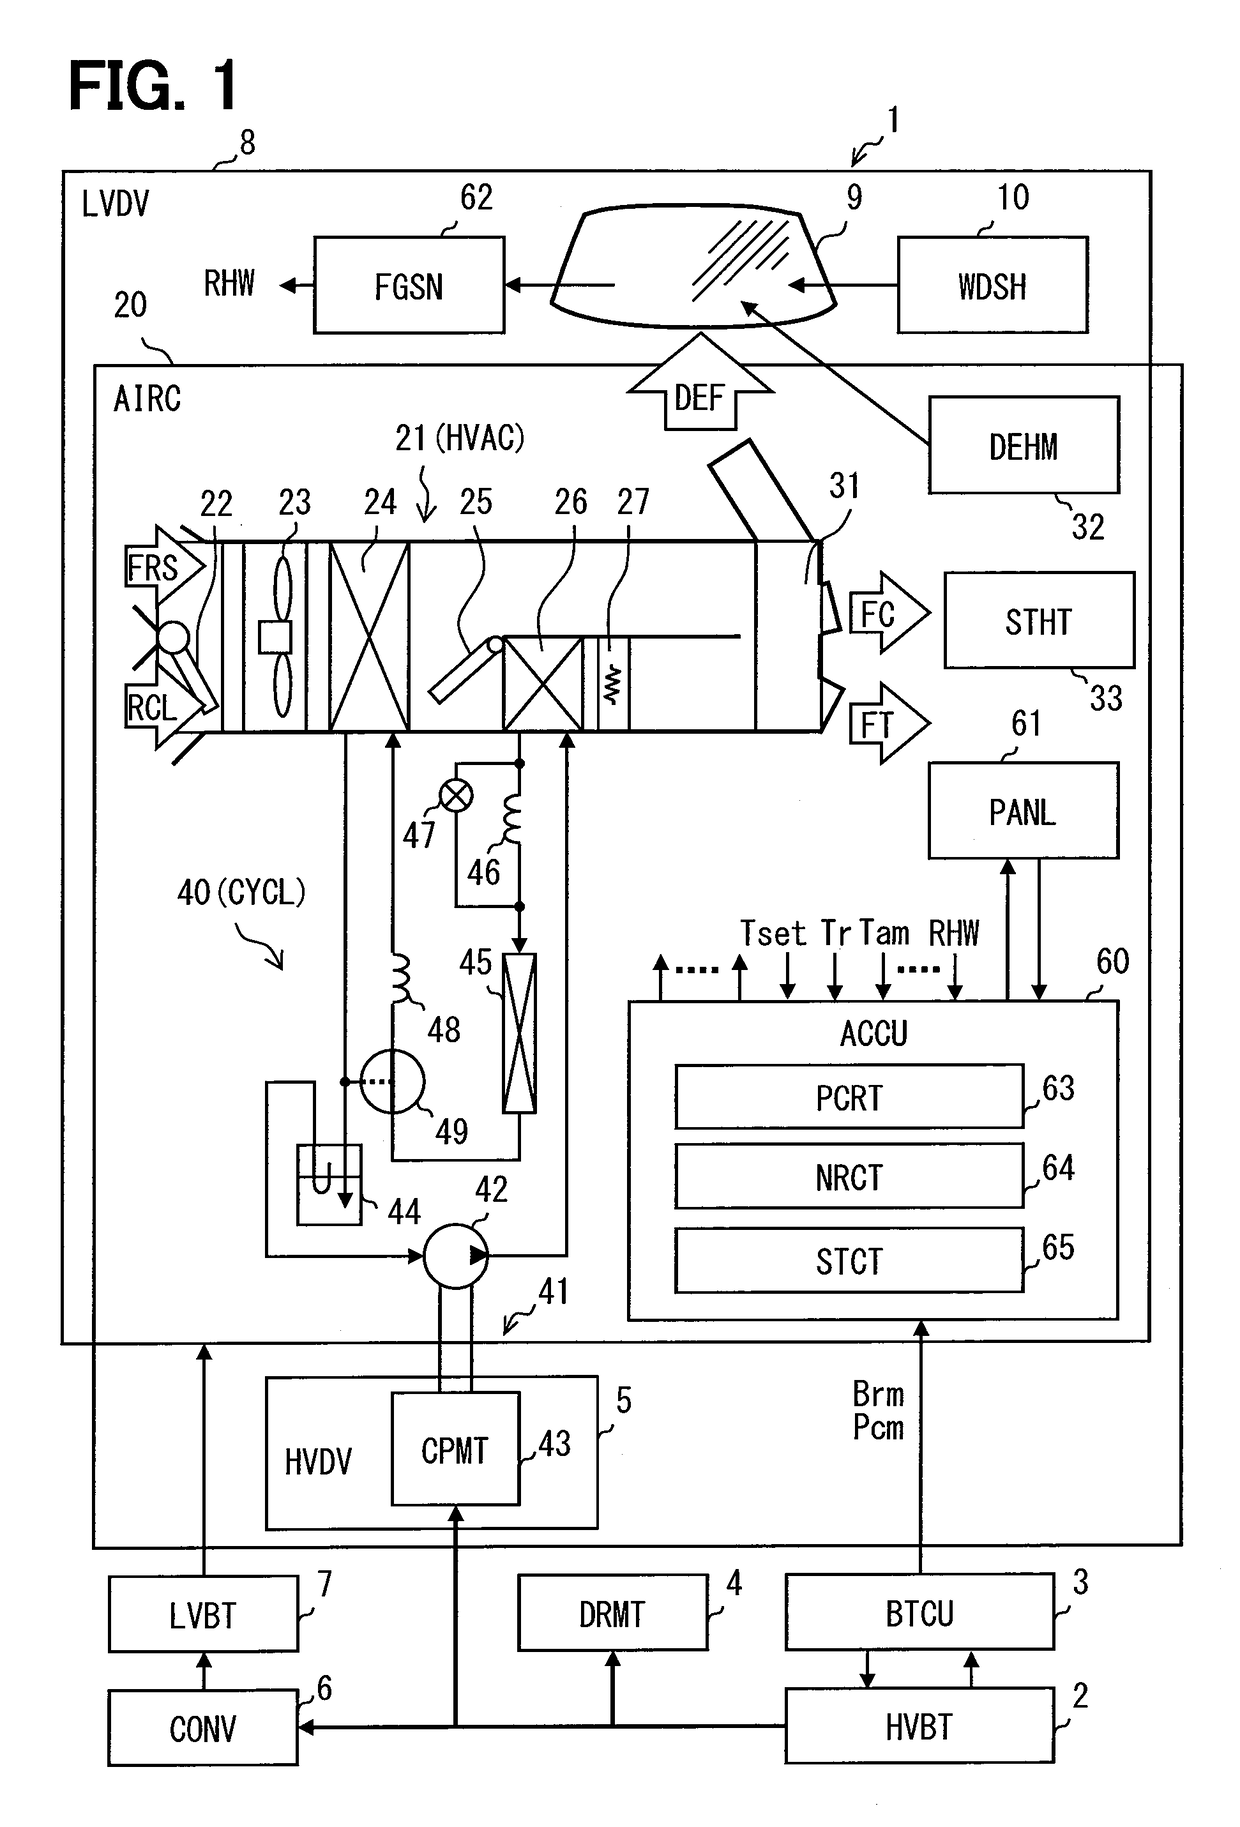 Electric vehicle air-conditioning device